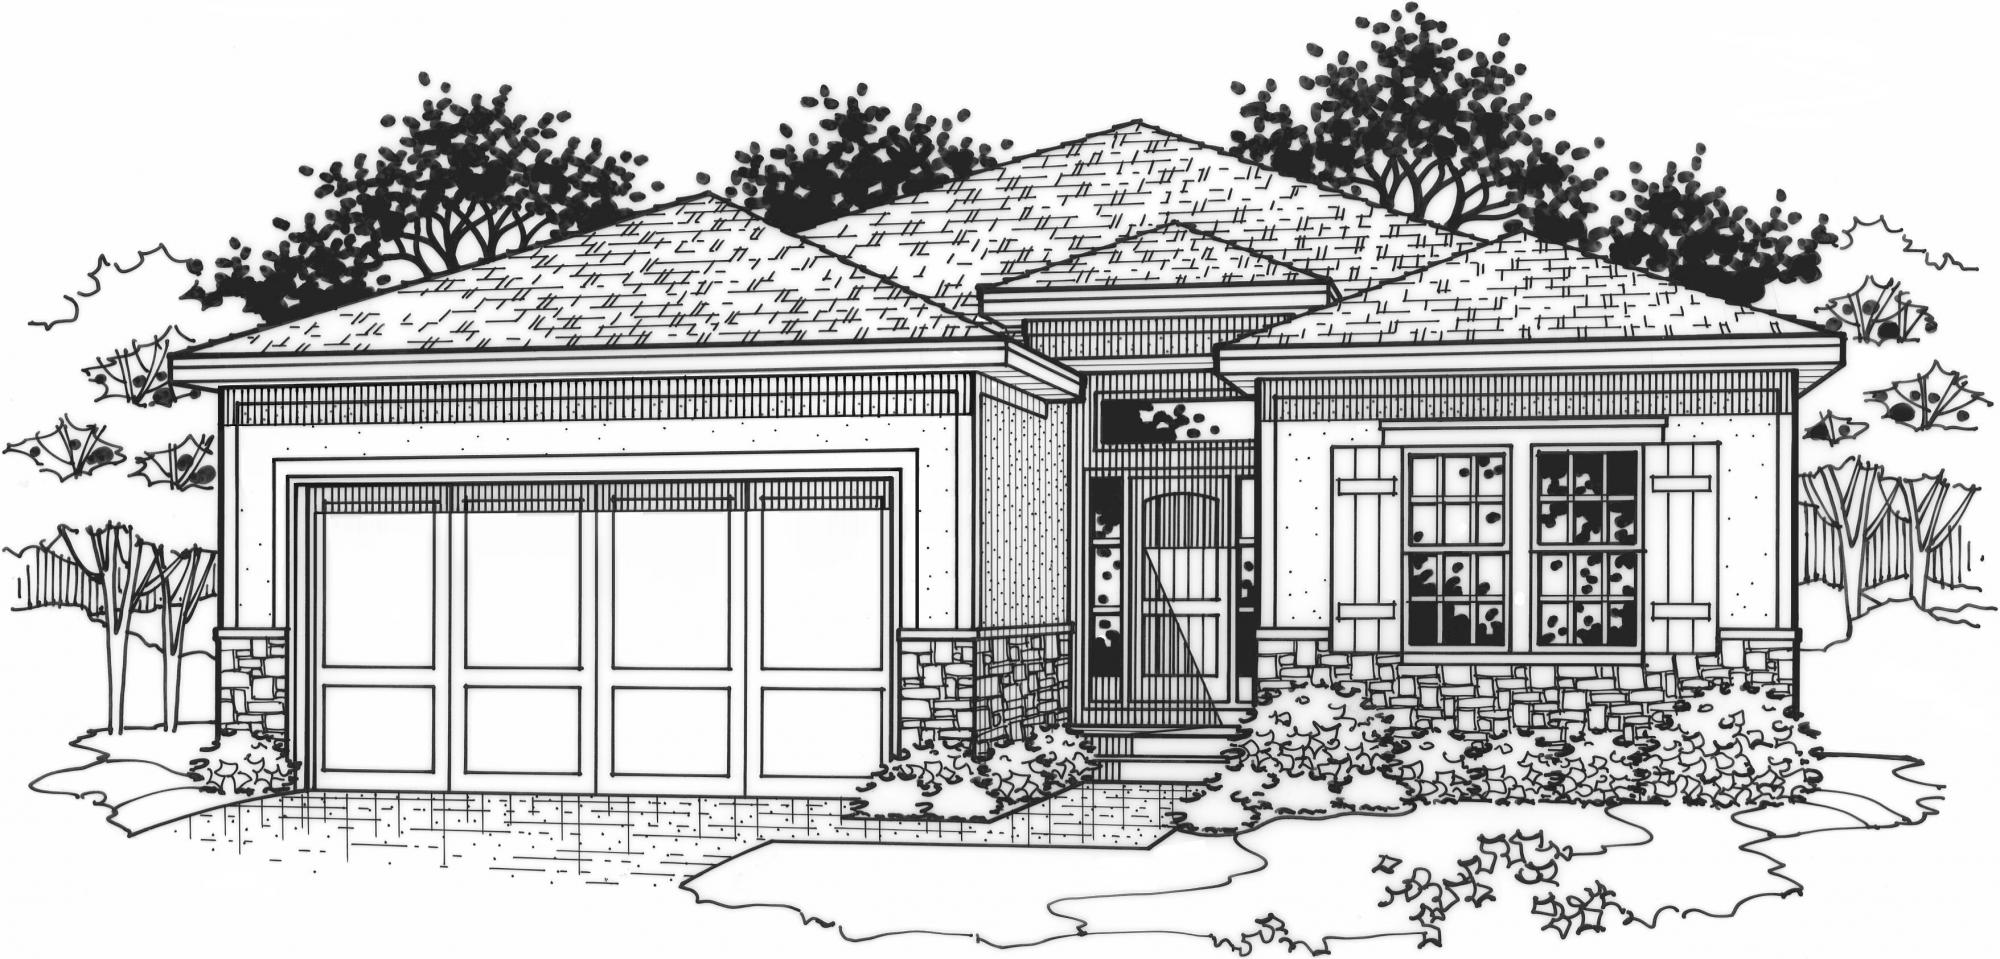 black and white rendering of a estes model from Lambie custom homes